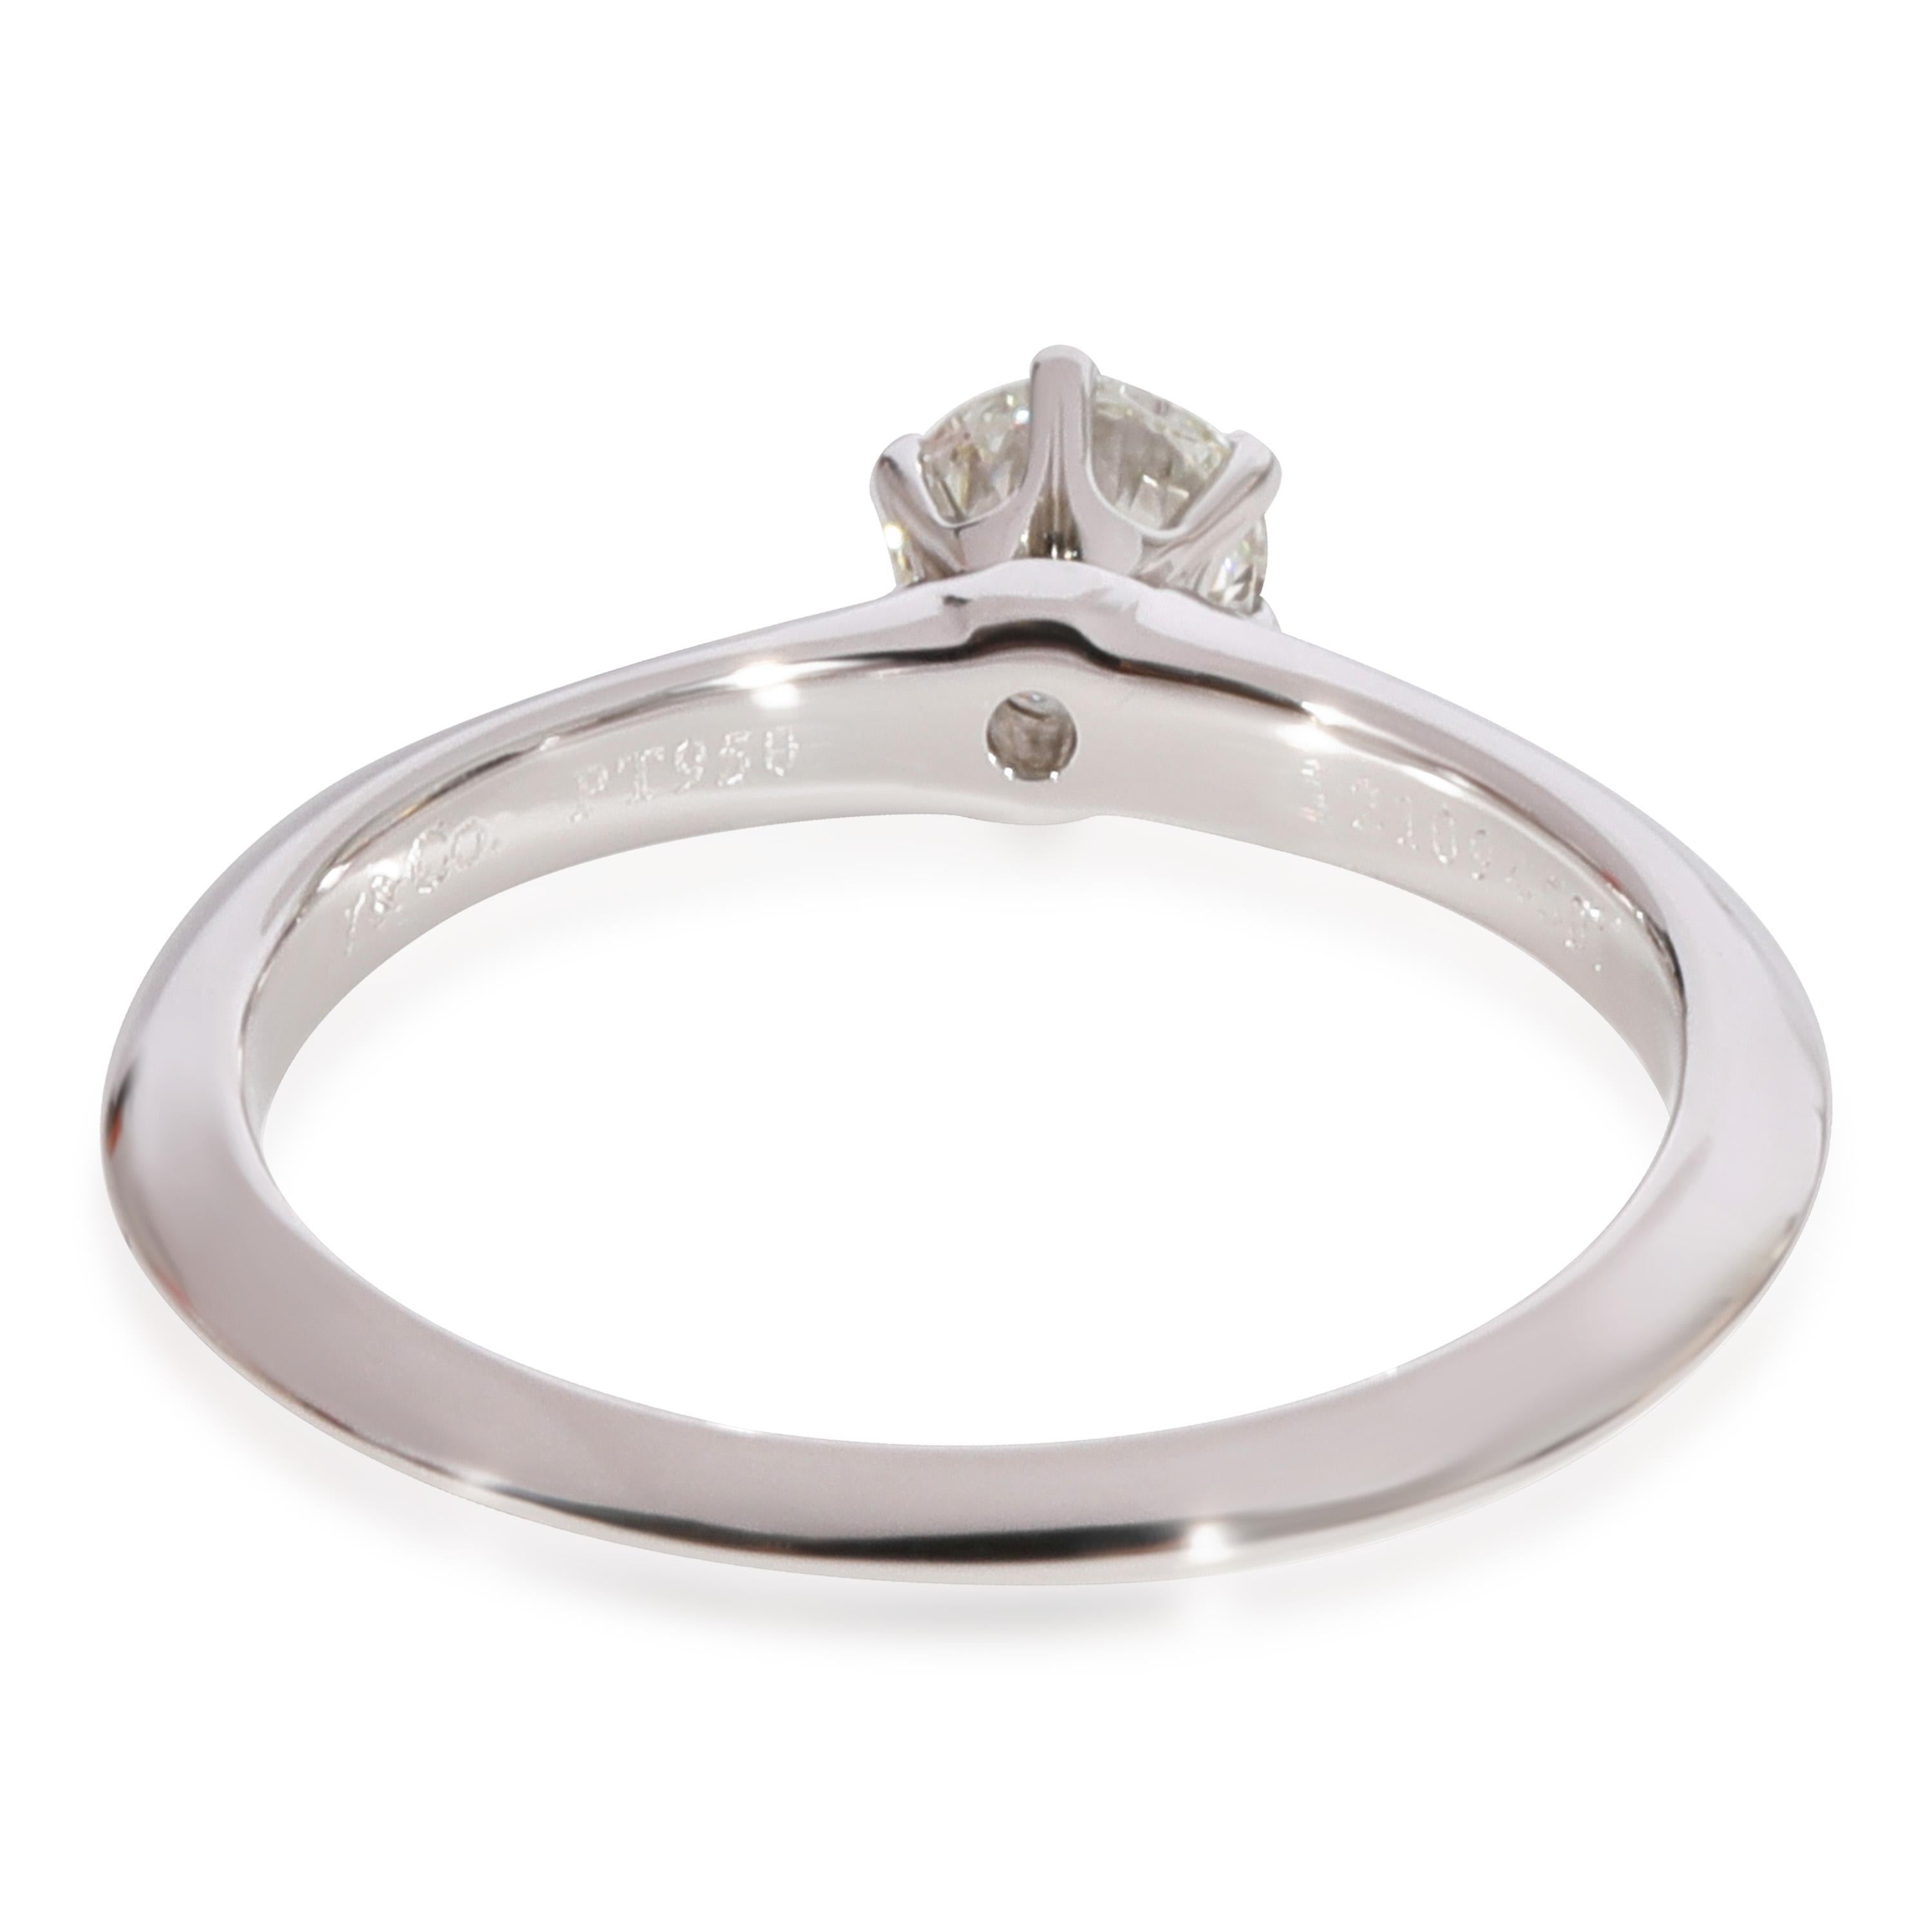 Tiffany & Co. Diamond Solitaire Ring in 950 Platinum I VVS1 0.31 CTW

PRIMARY DETAILS
SKU: 123649
Listing Title: Tiffany & Co. Diamond Solitaire Ring in 950 Platinum I VVS1 0.31 CTW
Condition Description: Retails for 2750 USD. In excellent condition